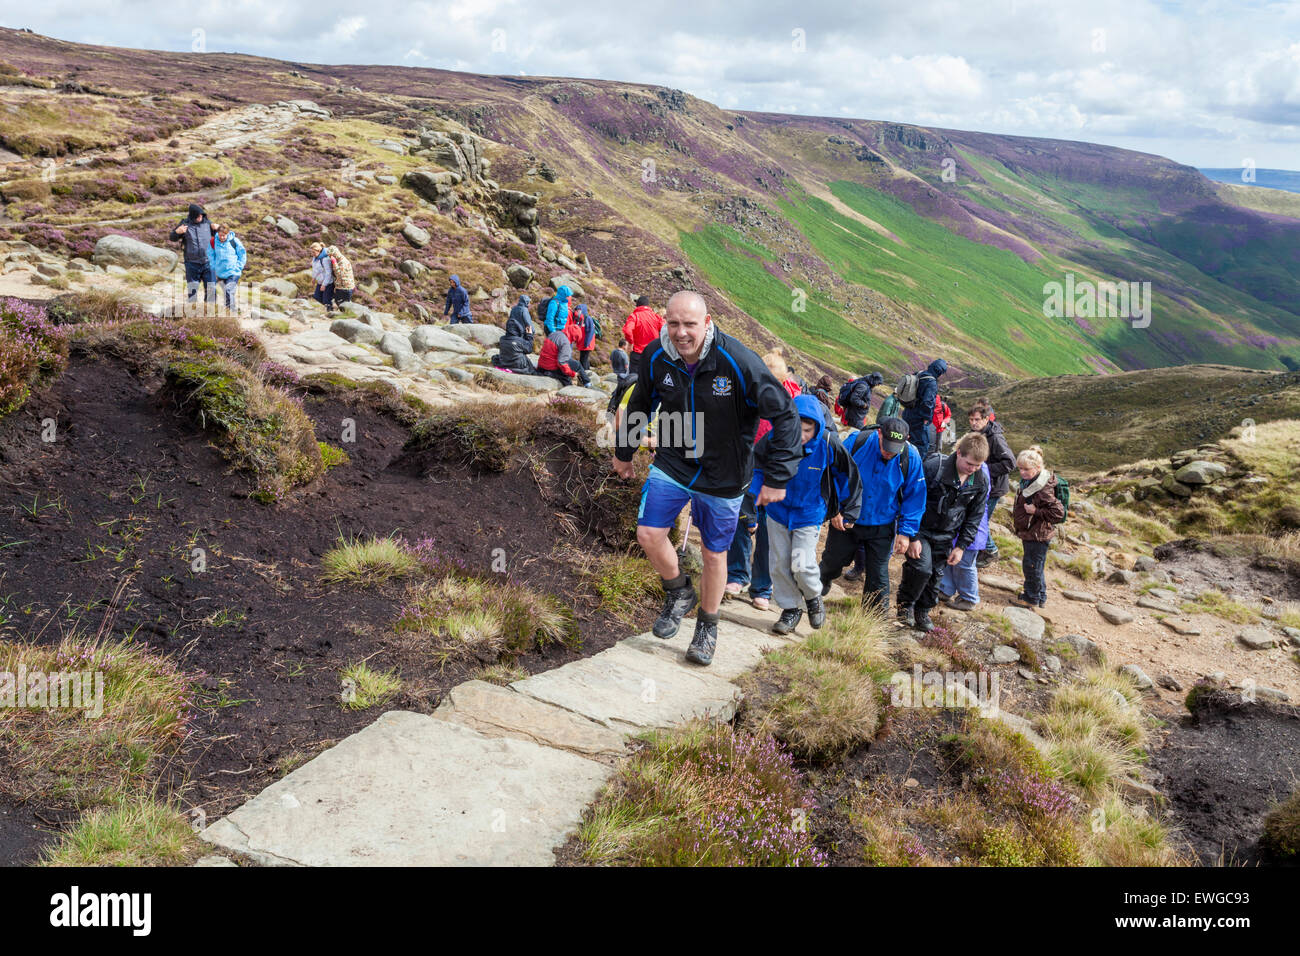 A large walking group. Walkers hiking on a stone path at the top of Grindsbrook Clough, Kinder Scout, Derbyshire, Peak District, England, UK Stock Photo